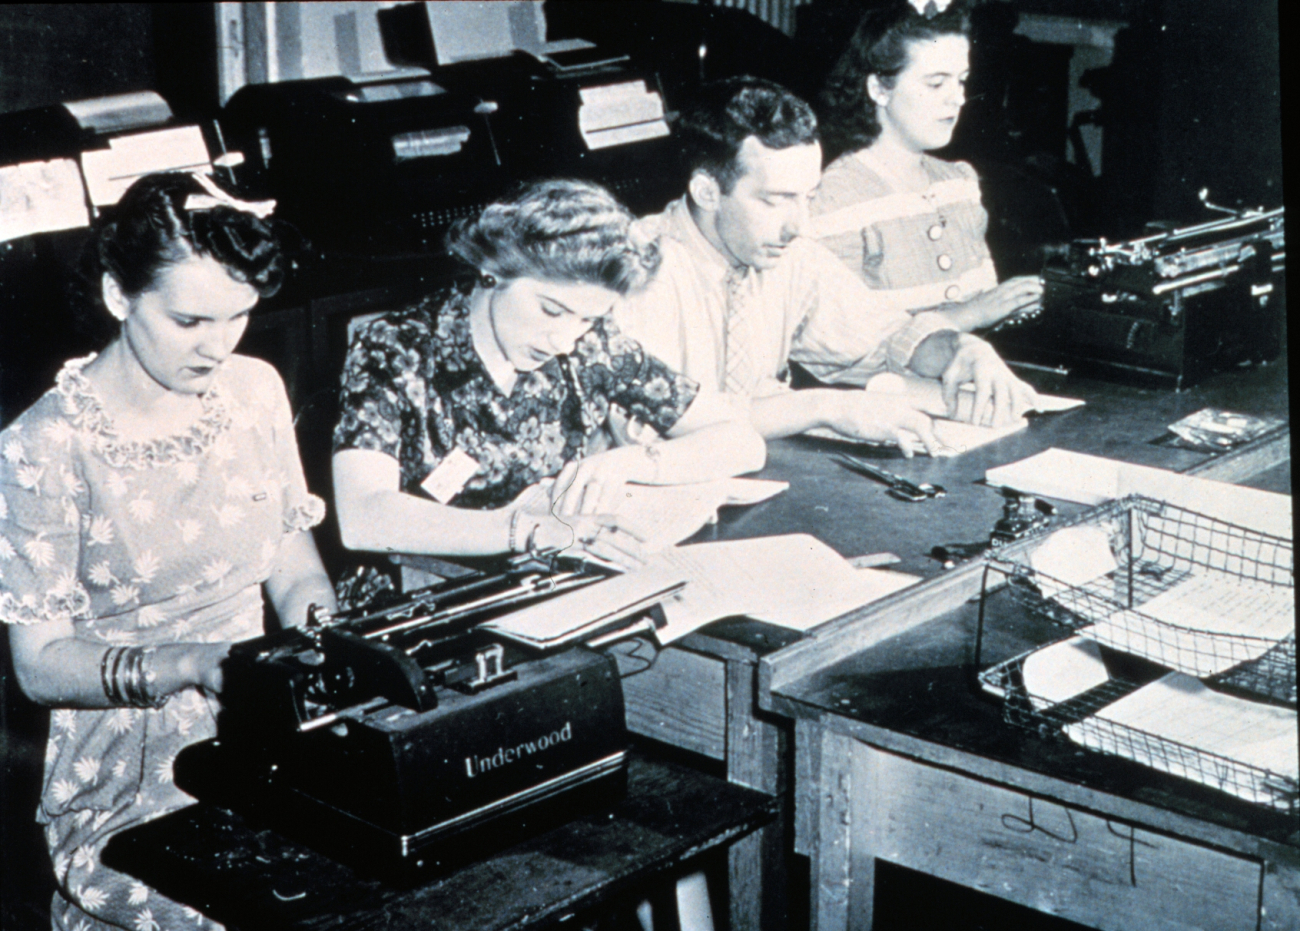 Hard at work in the teletype center - note teletype machines behind personnelWomen's first opportunities in meteorology occurred as a result of WWII